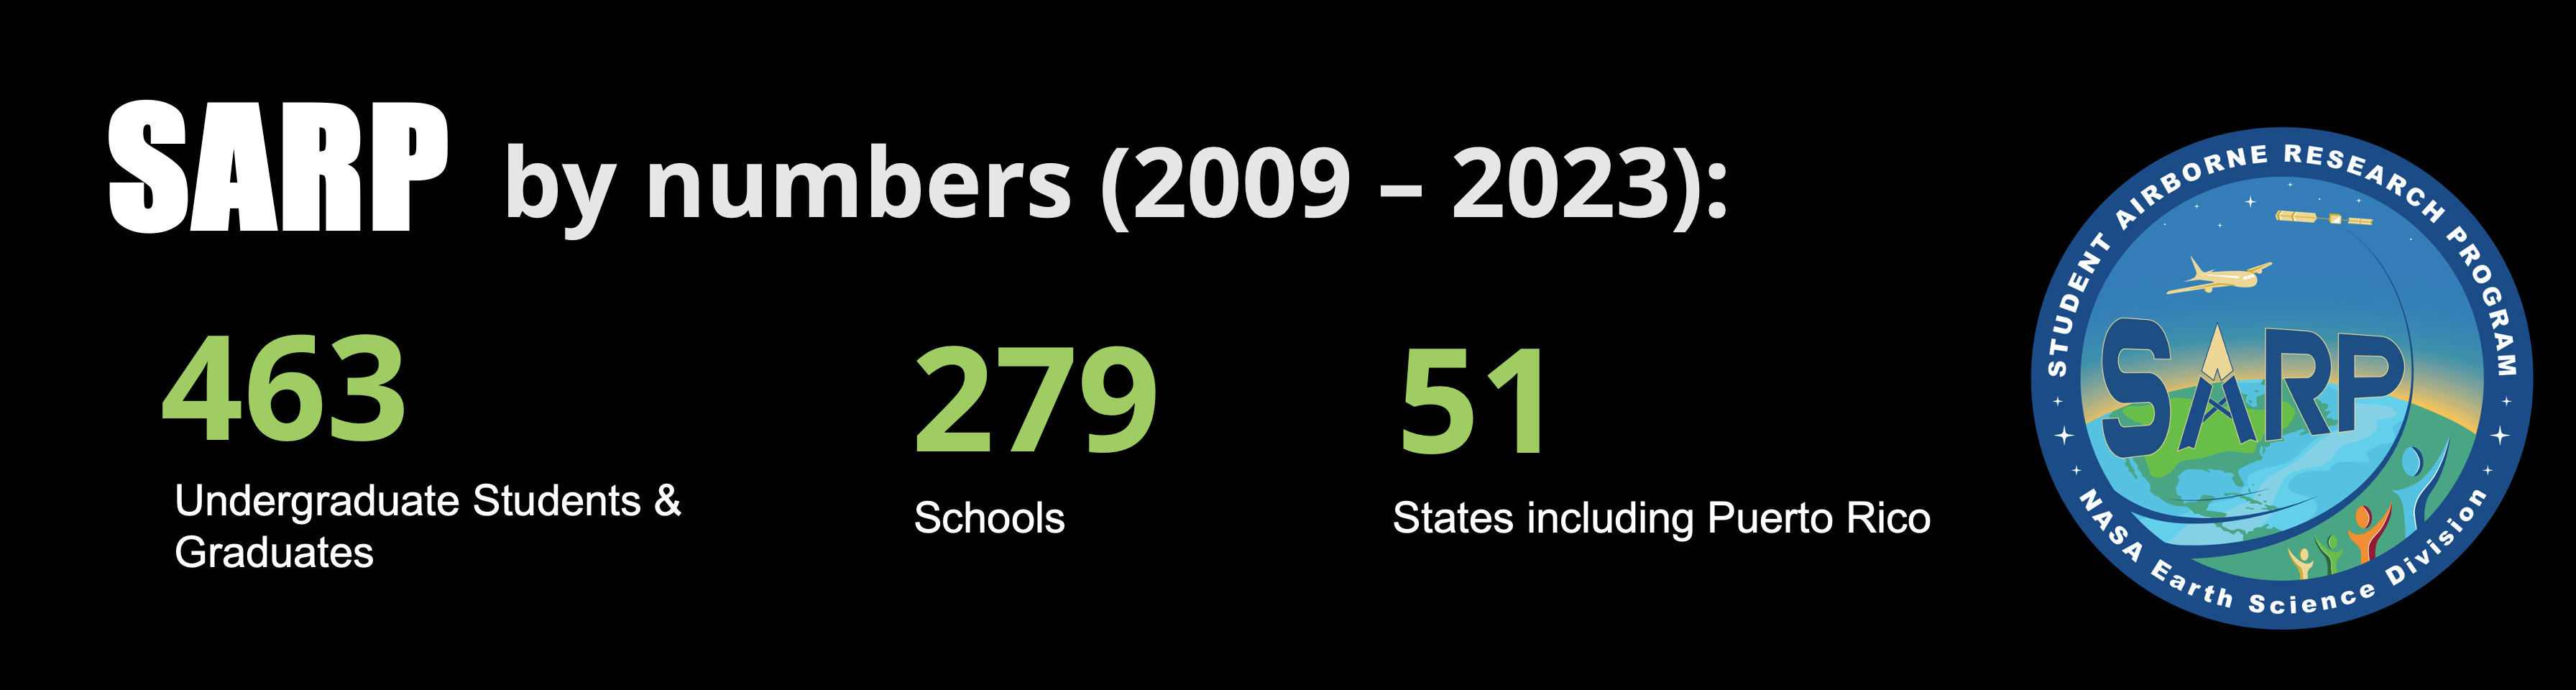 SARP by the numbers, from 2009-2023, includes 9463 undergraduate and graduate students, from 279 schools in 50 states (including Puerto Rico). The numbers are on a black background with the SARP patch to the right.